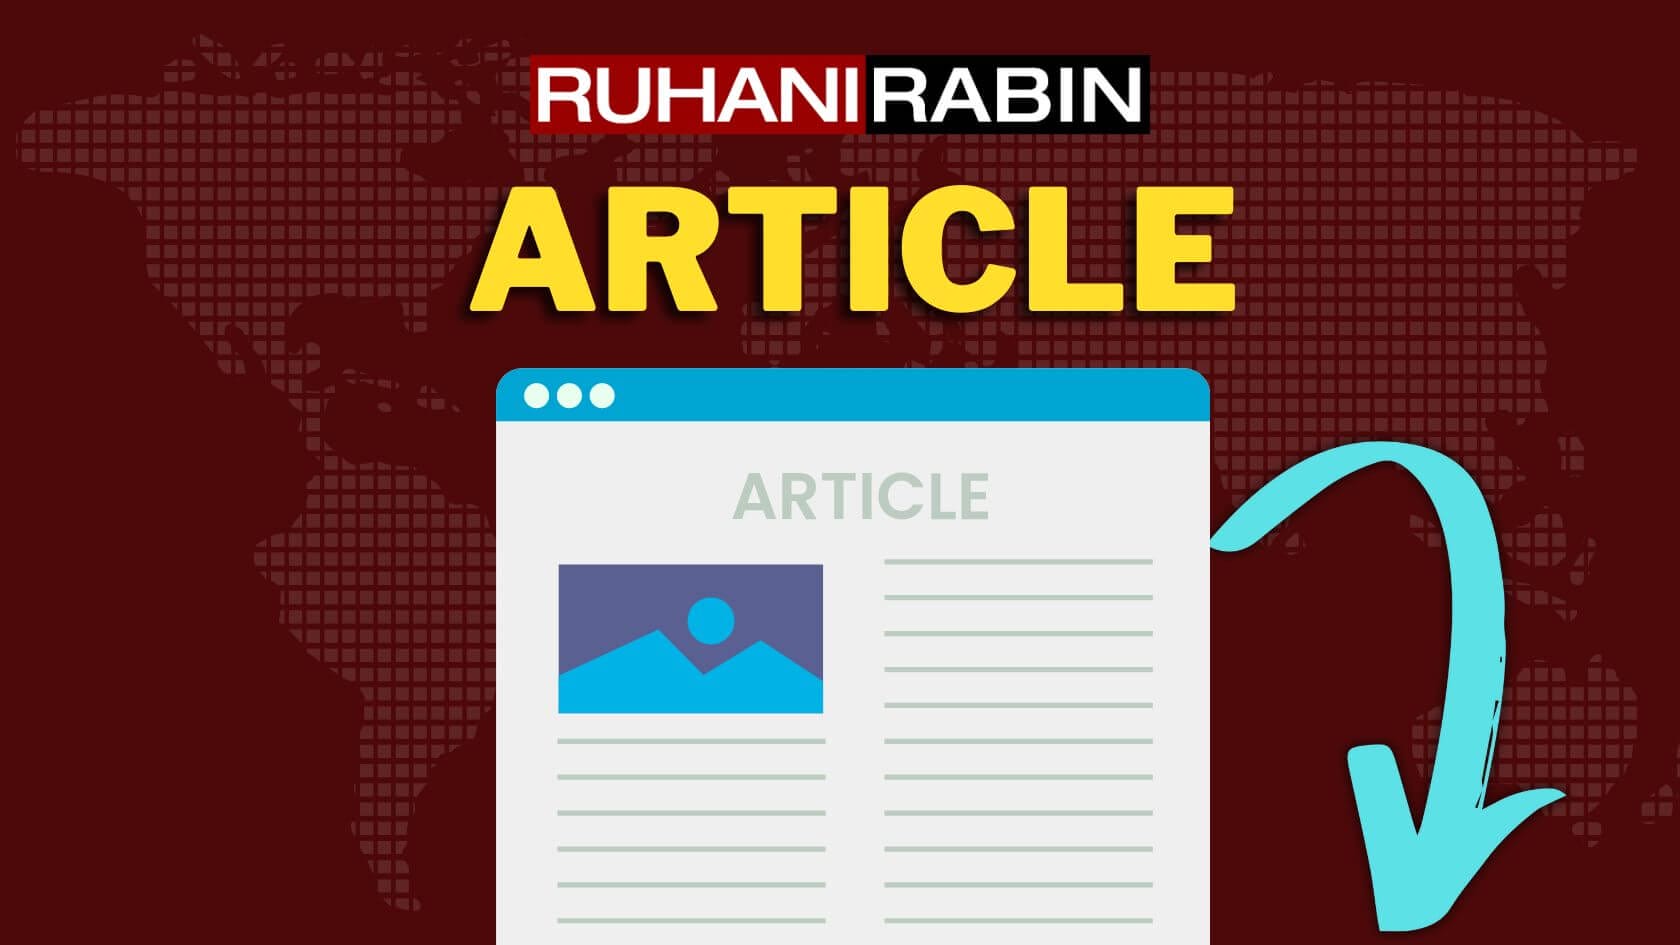 A picture shows a digital document labeled "ARTICLE" that has a blue box where an image will go and lines of text. The backdrop is a world map, and at the top, the name "Ruhani Rabin" is written in bold. An arrow points to the article to highlight its significance.